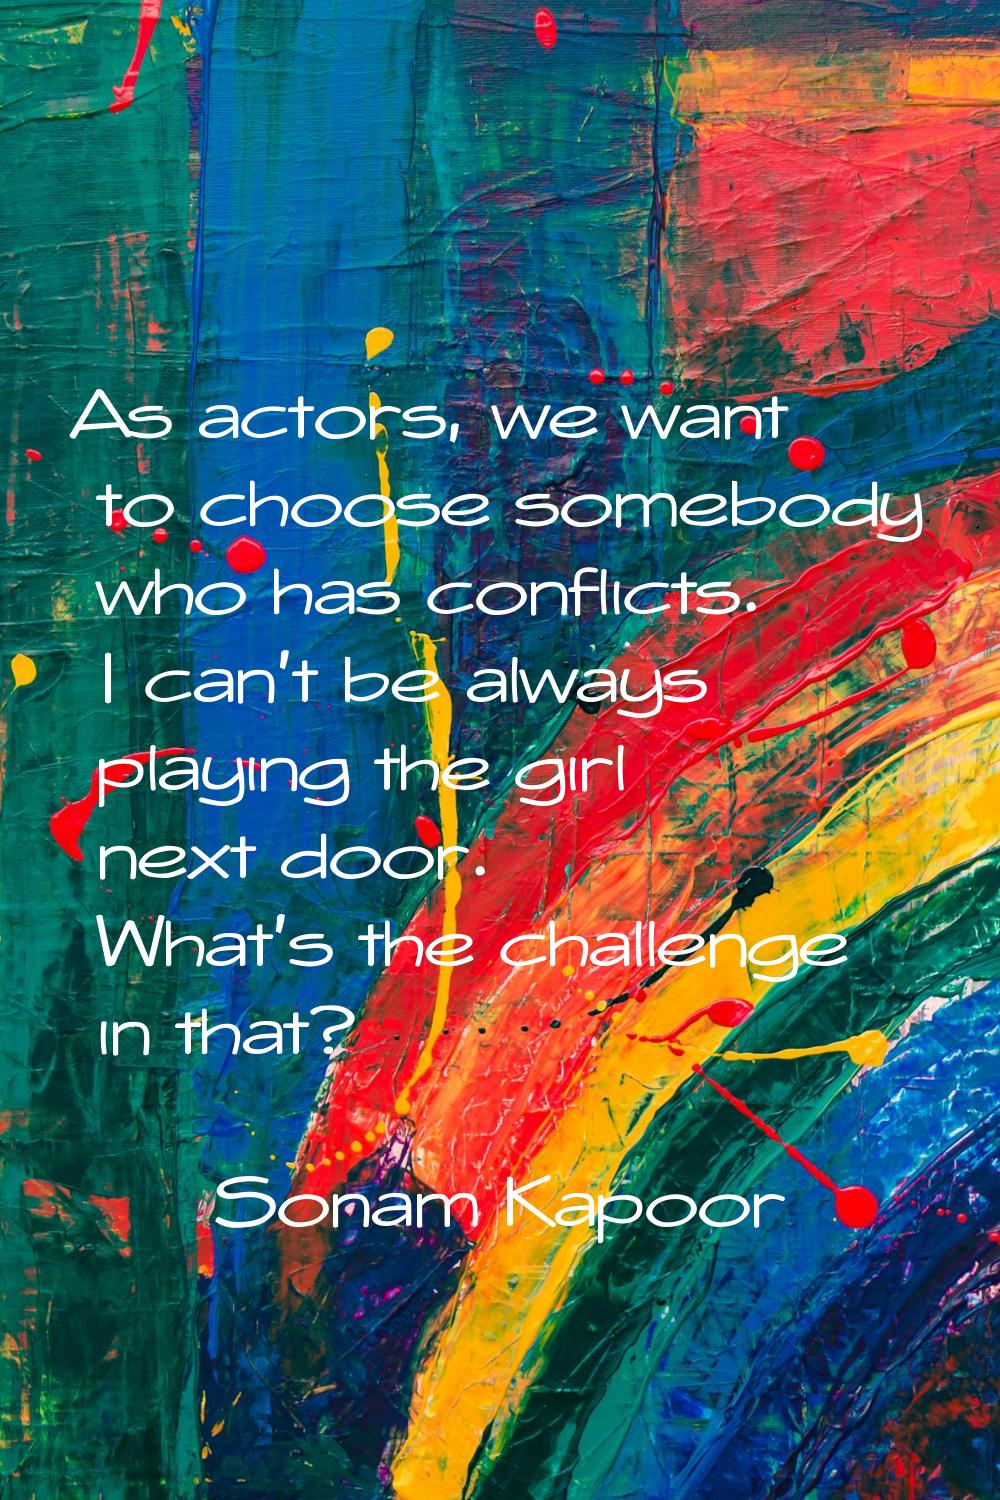 As actors, we want to choose somebody who has conflicts. I can't be always playing the girl next do